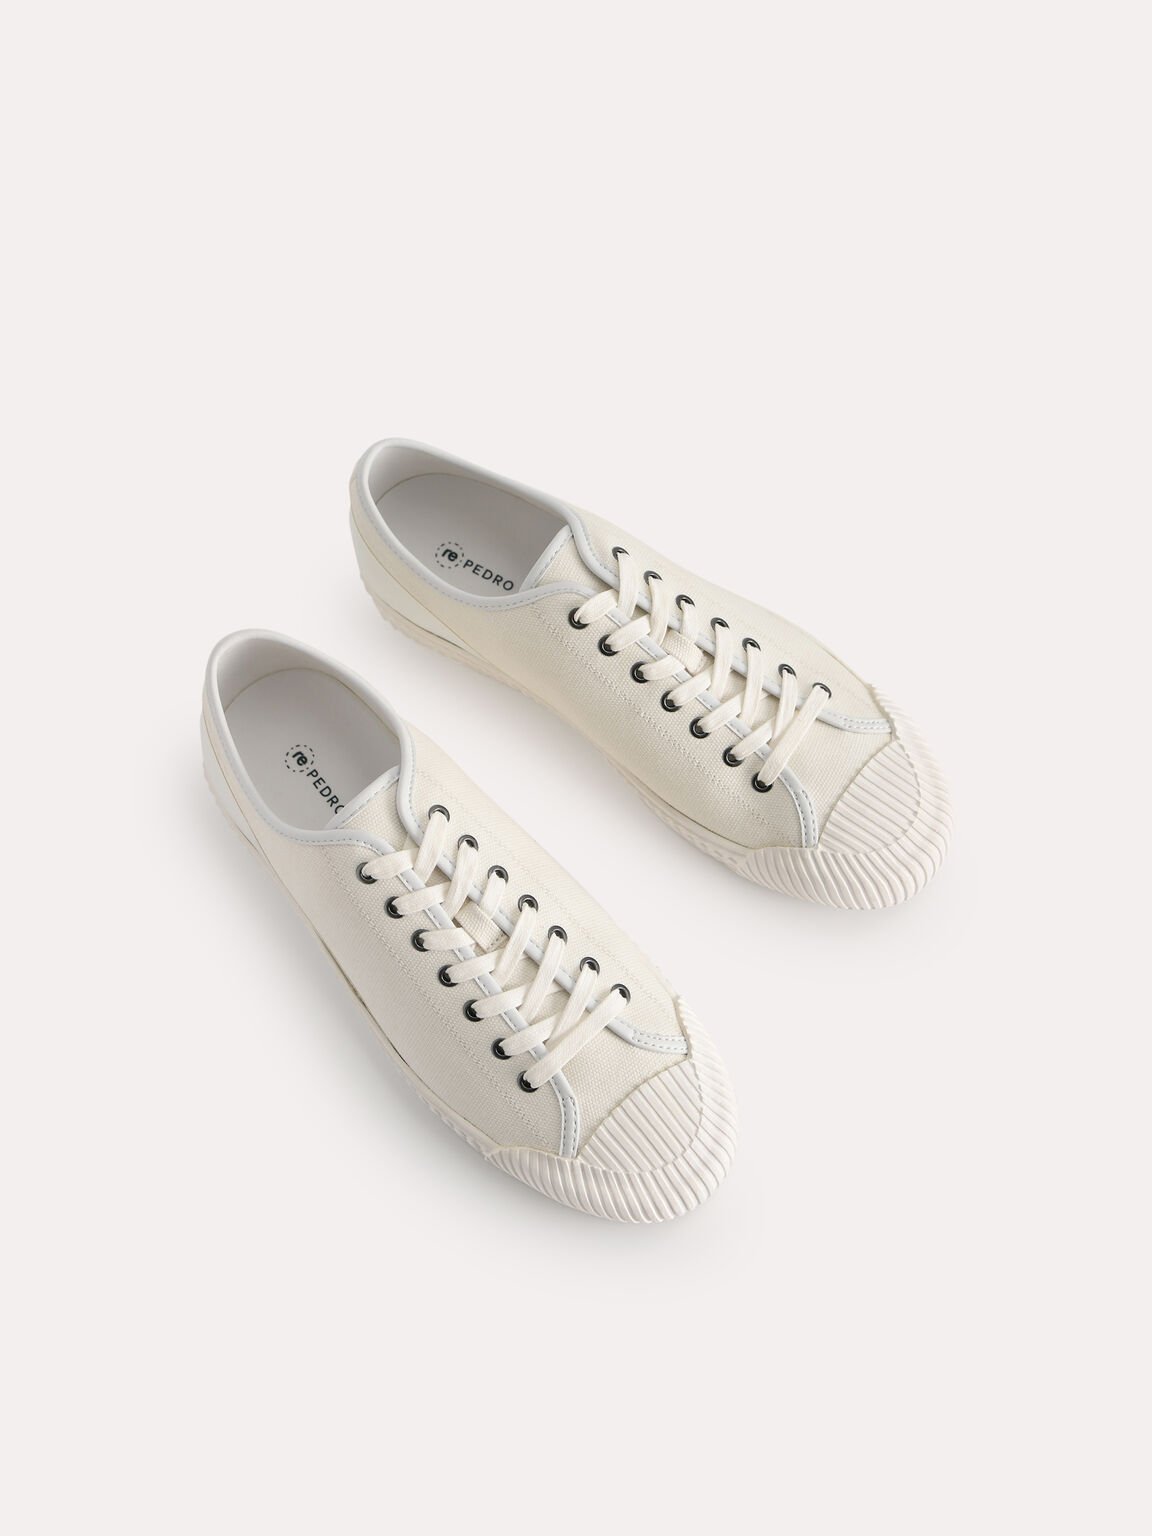 rePEDRO Lace-up Sneaker, Chalk